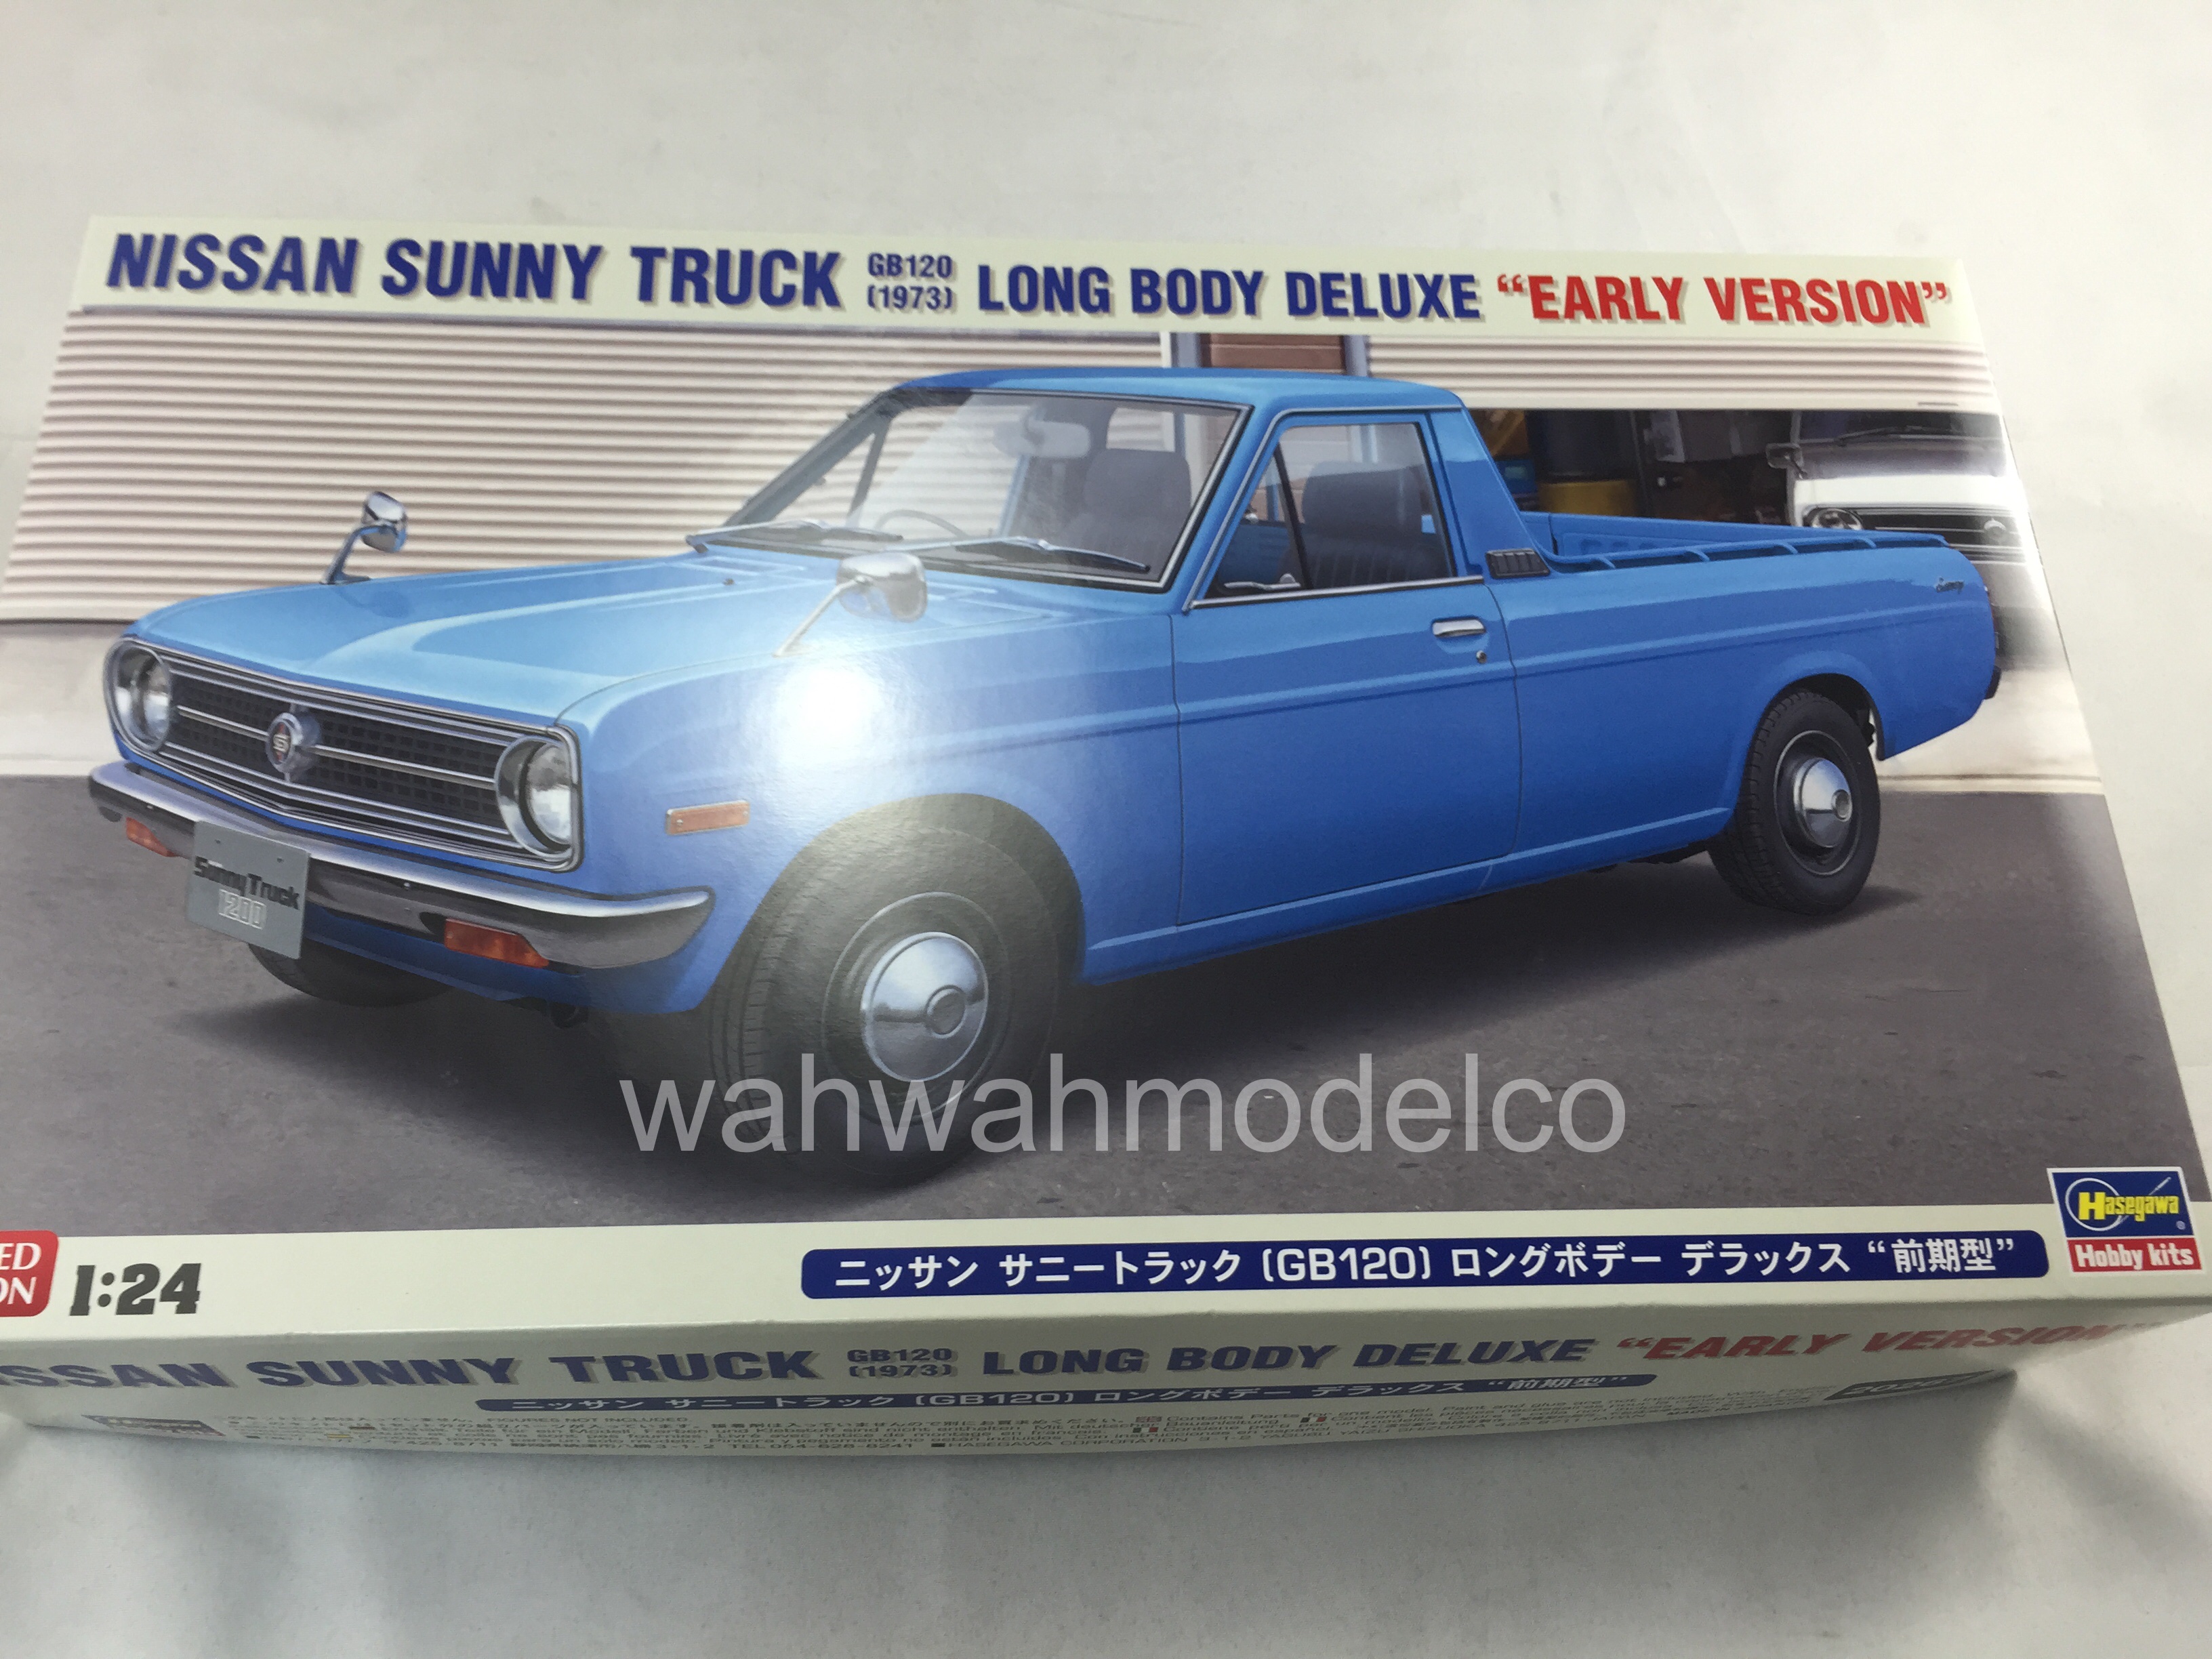 Hasegawa 1/24 Nissan Sunny Truck Long Body Deluxe Late Version 20275 